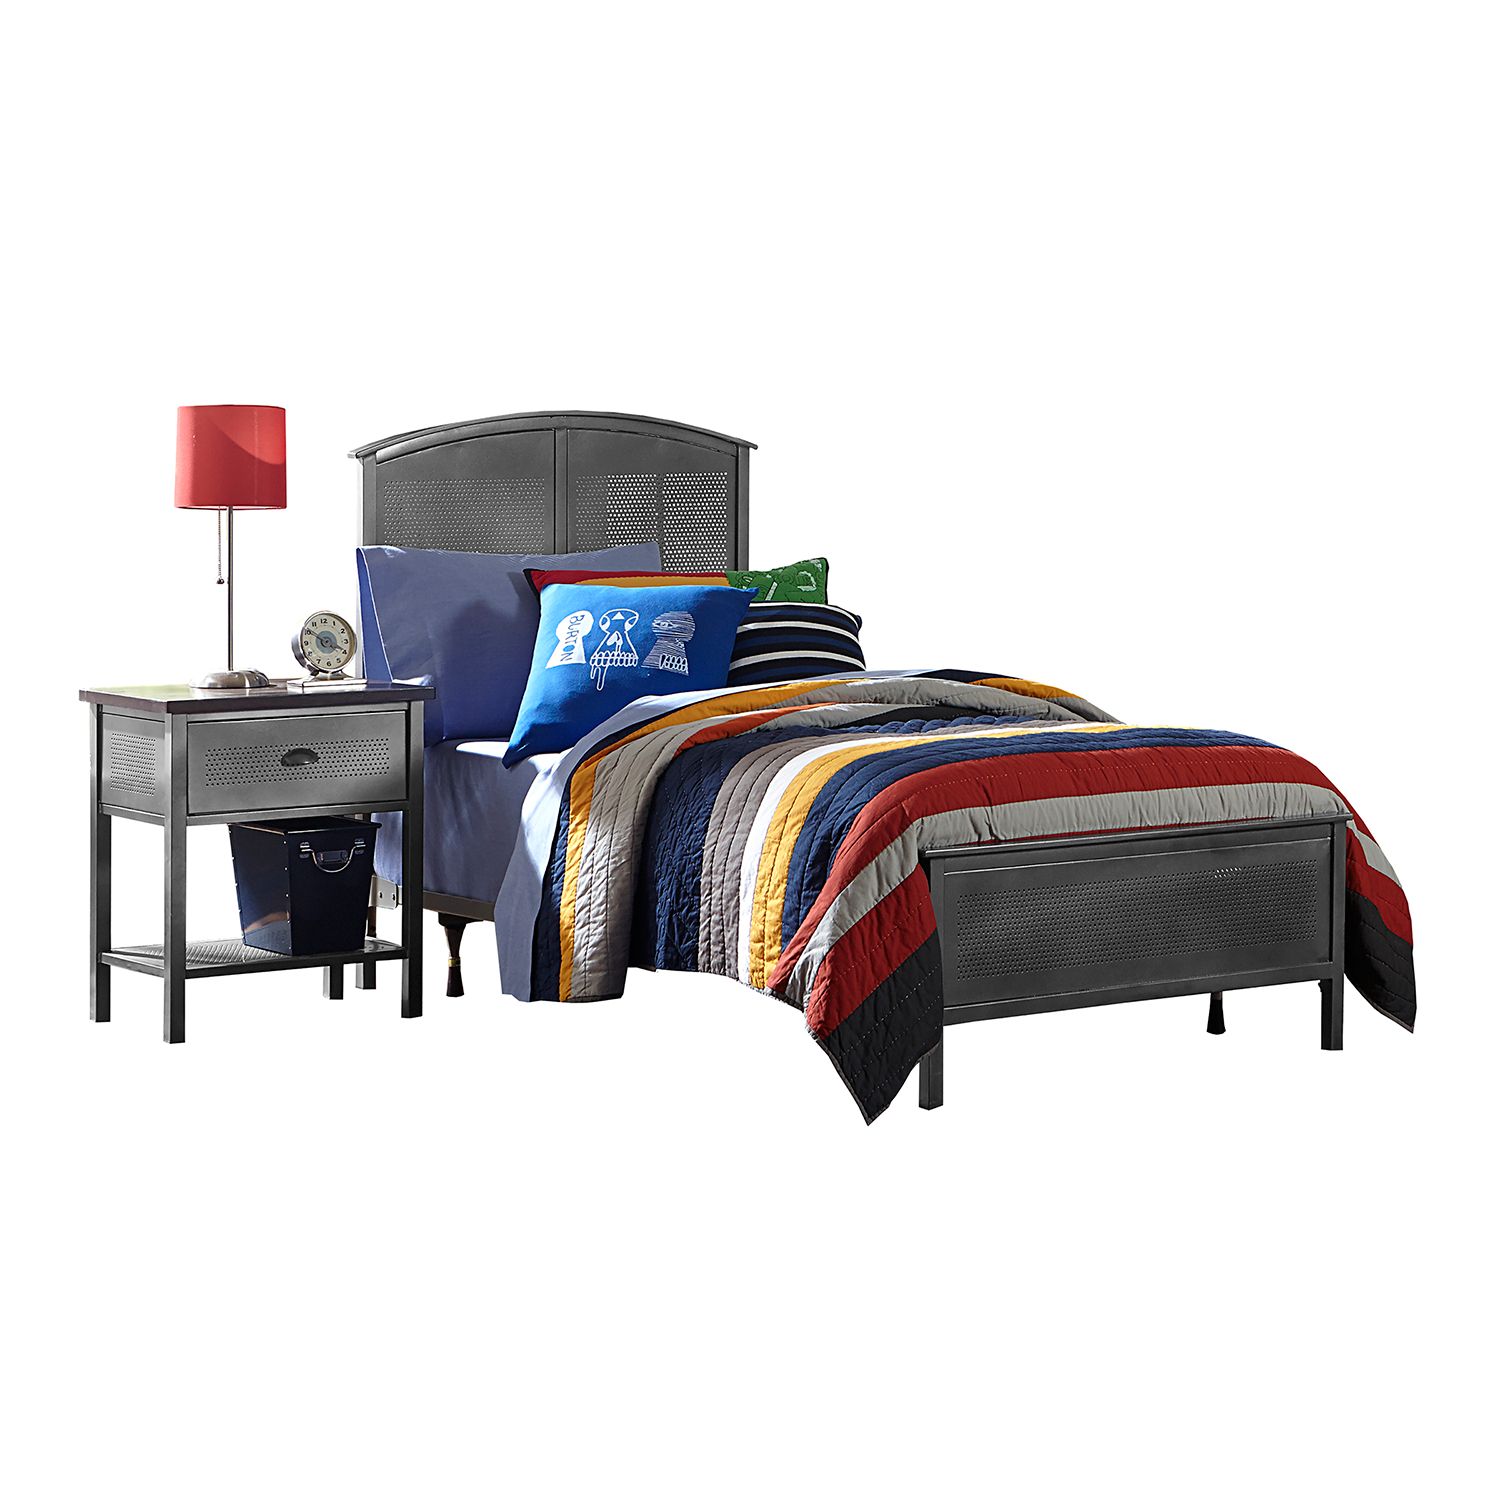 Image for Hillsdale Furniture Urban Quarters Bed at Kohl's.